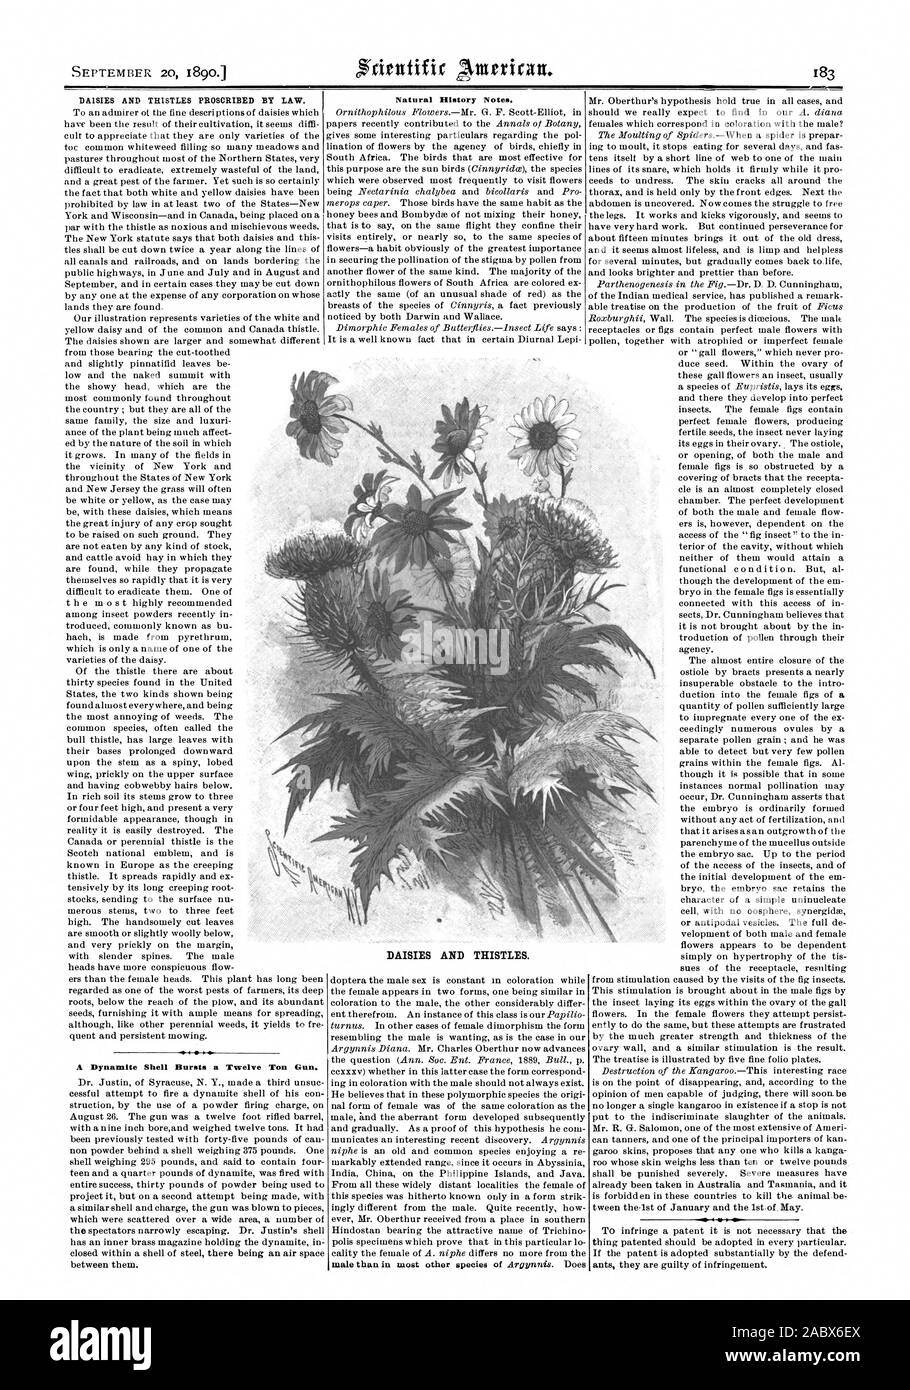 DAISIES AND THISTLES PROSCRIBED BY LAW. A Dynamite Shell Bursts a Twelve Ton Gun. Natural History Notes. DAISIES AND THISTLES., scientific american, 1890-09-20 Stock Photo